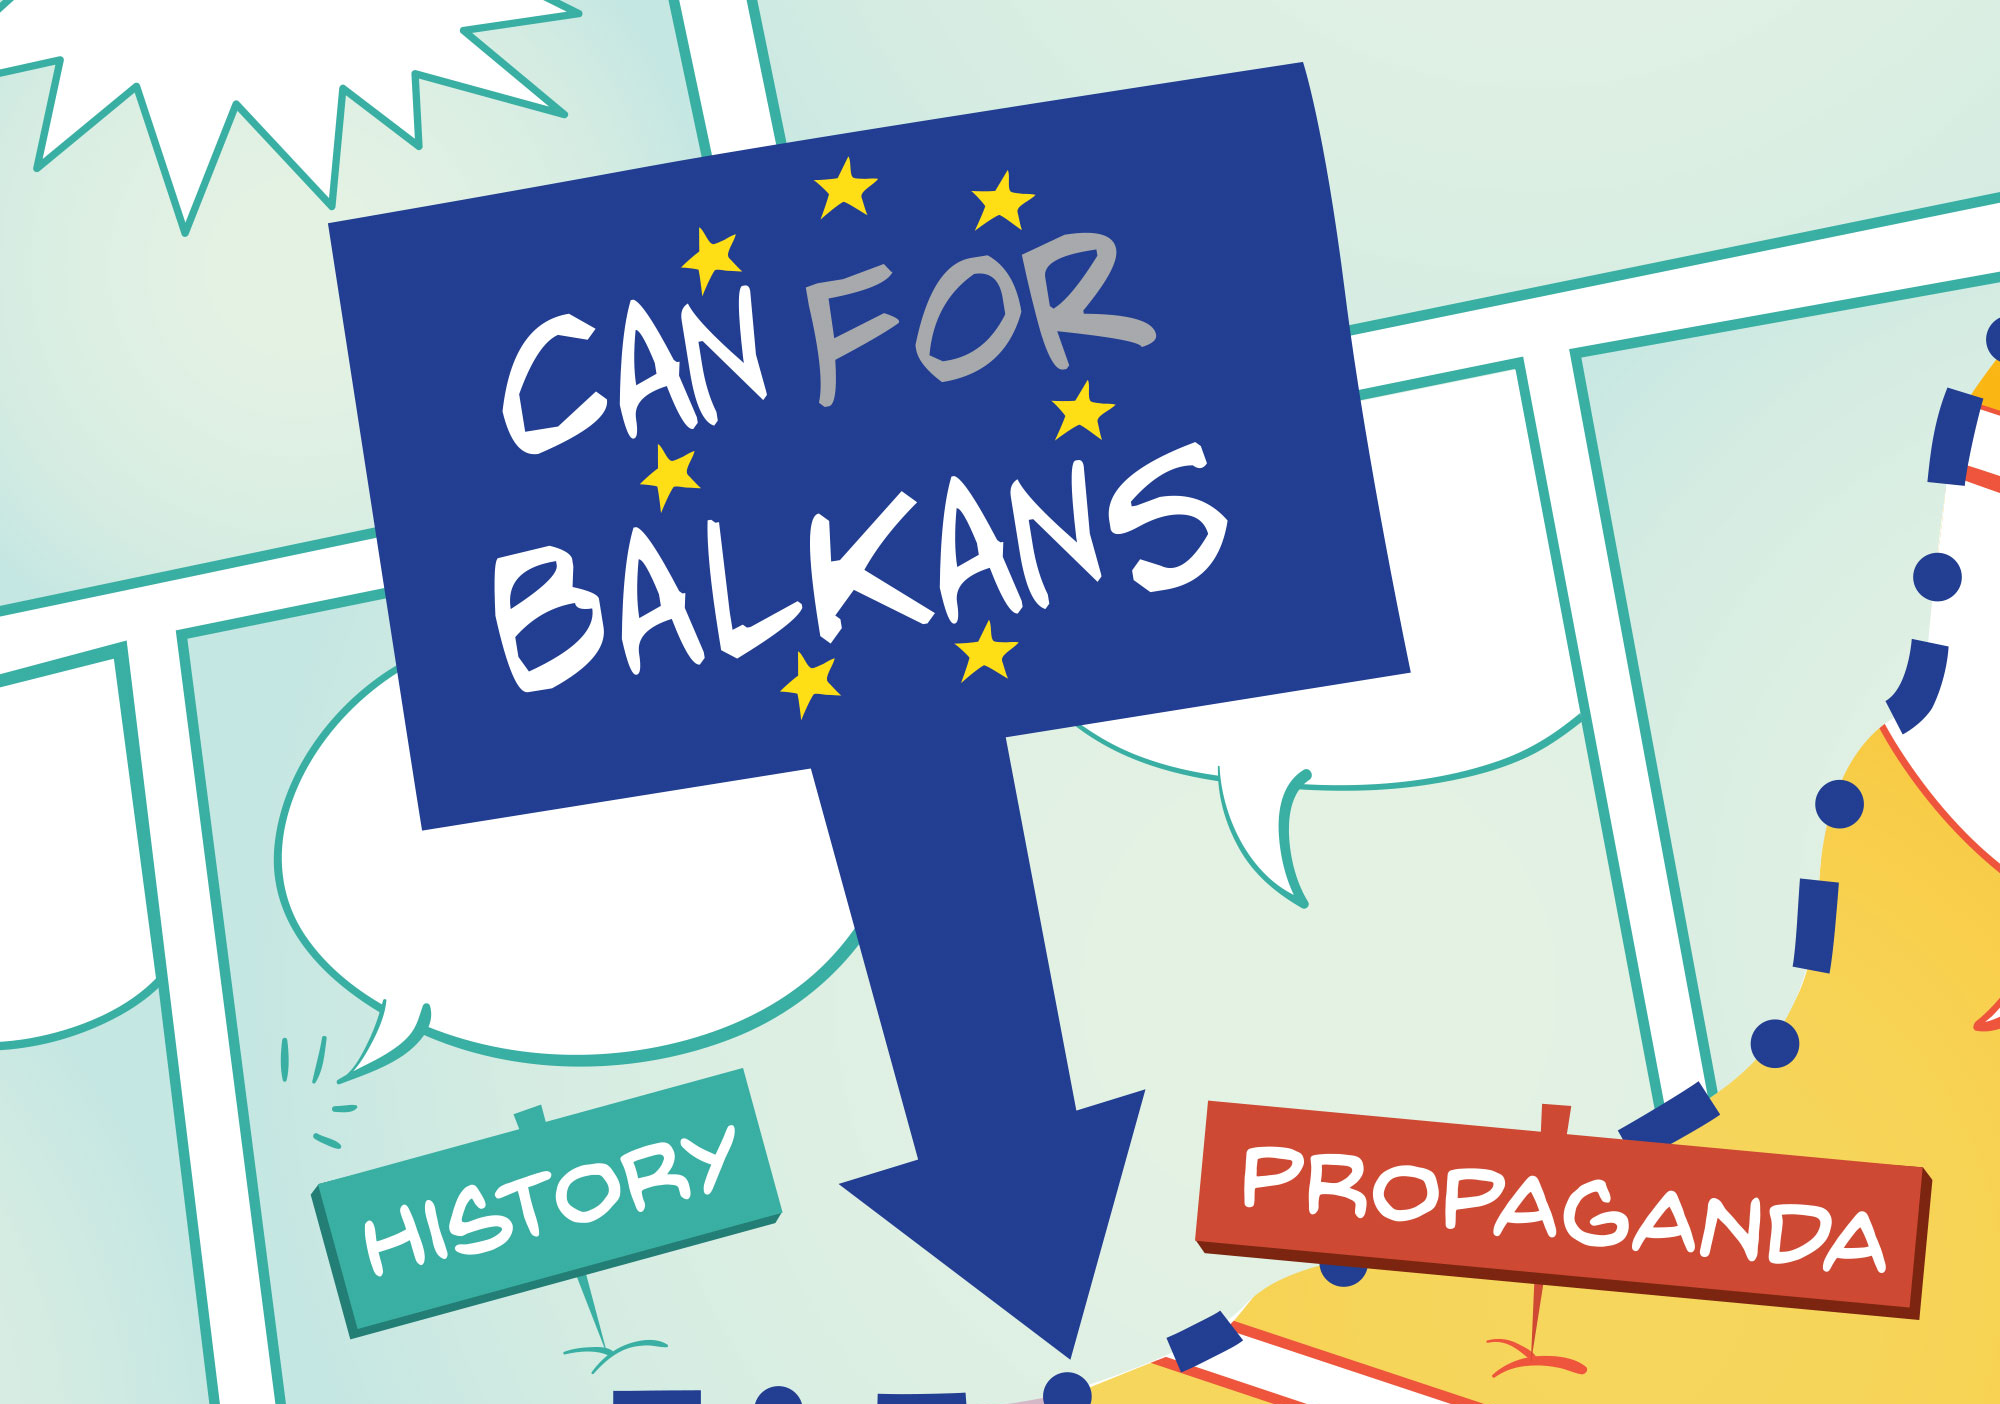 CAN for BALKANS